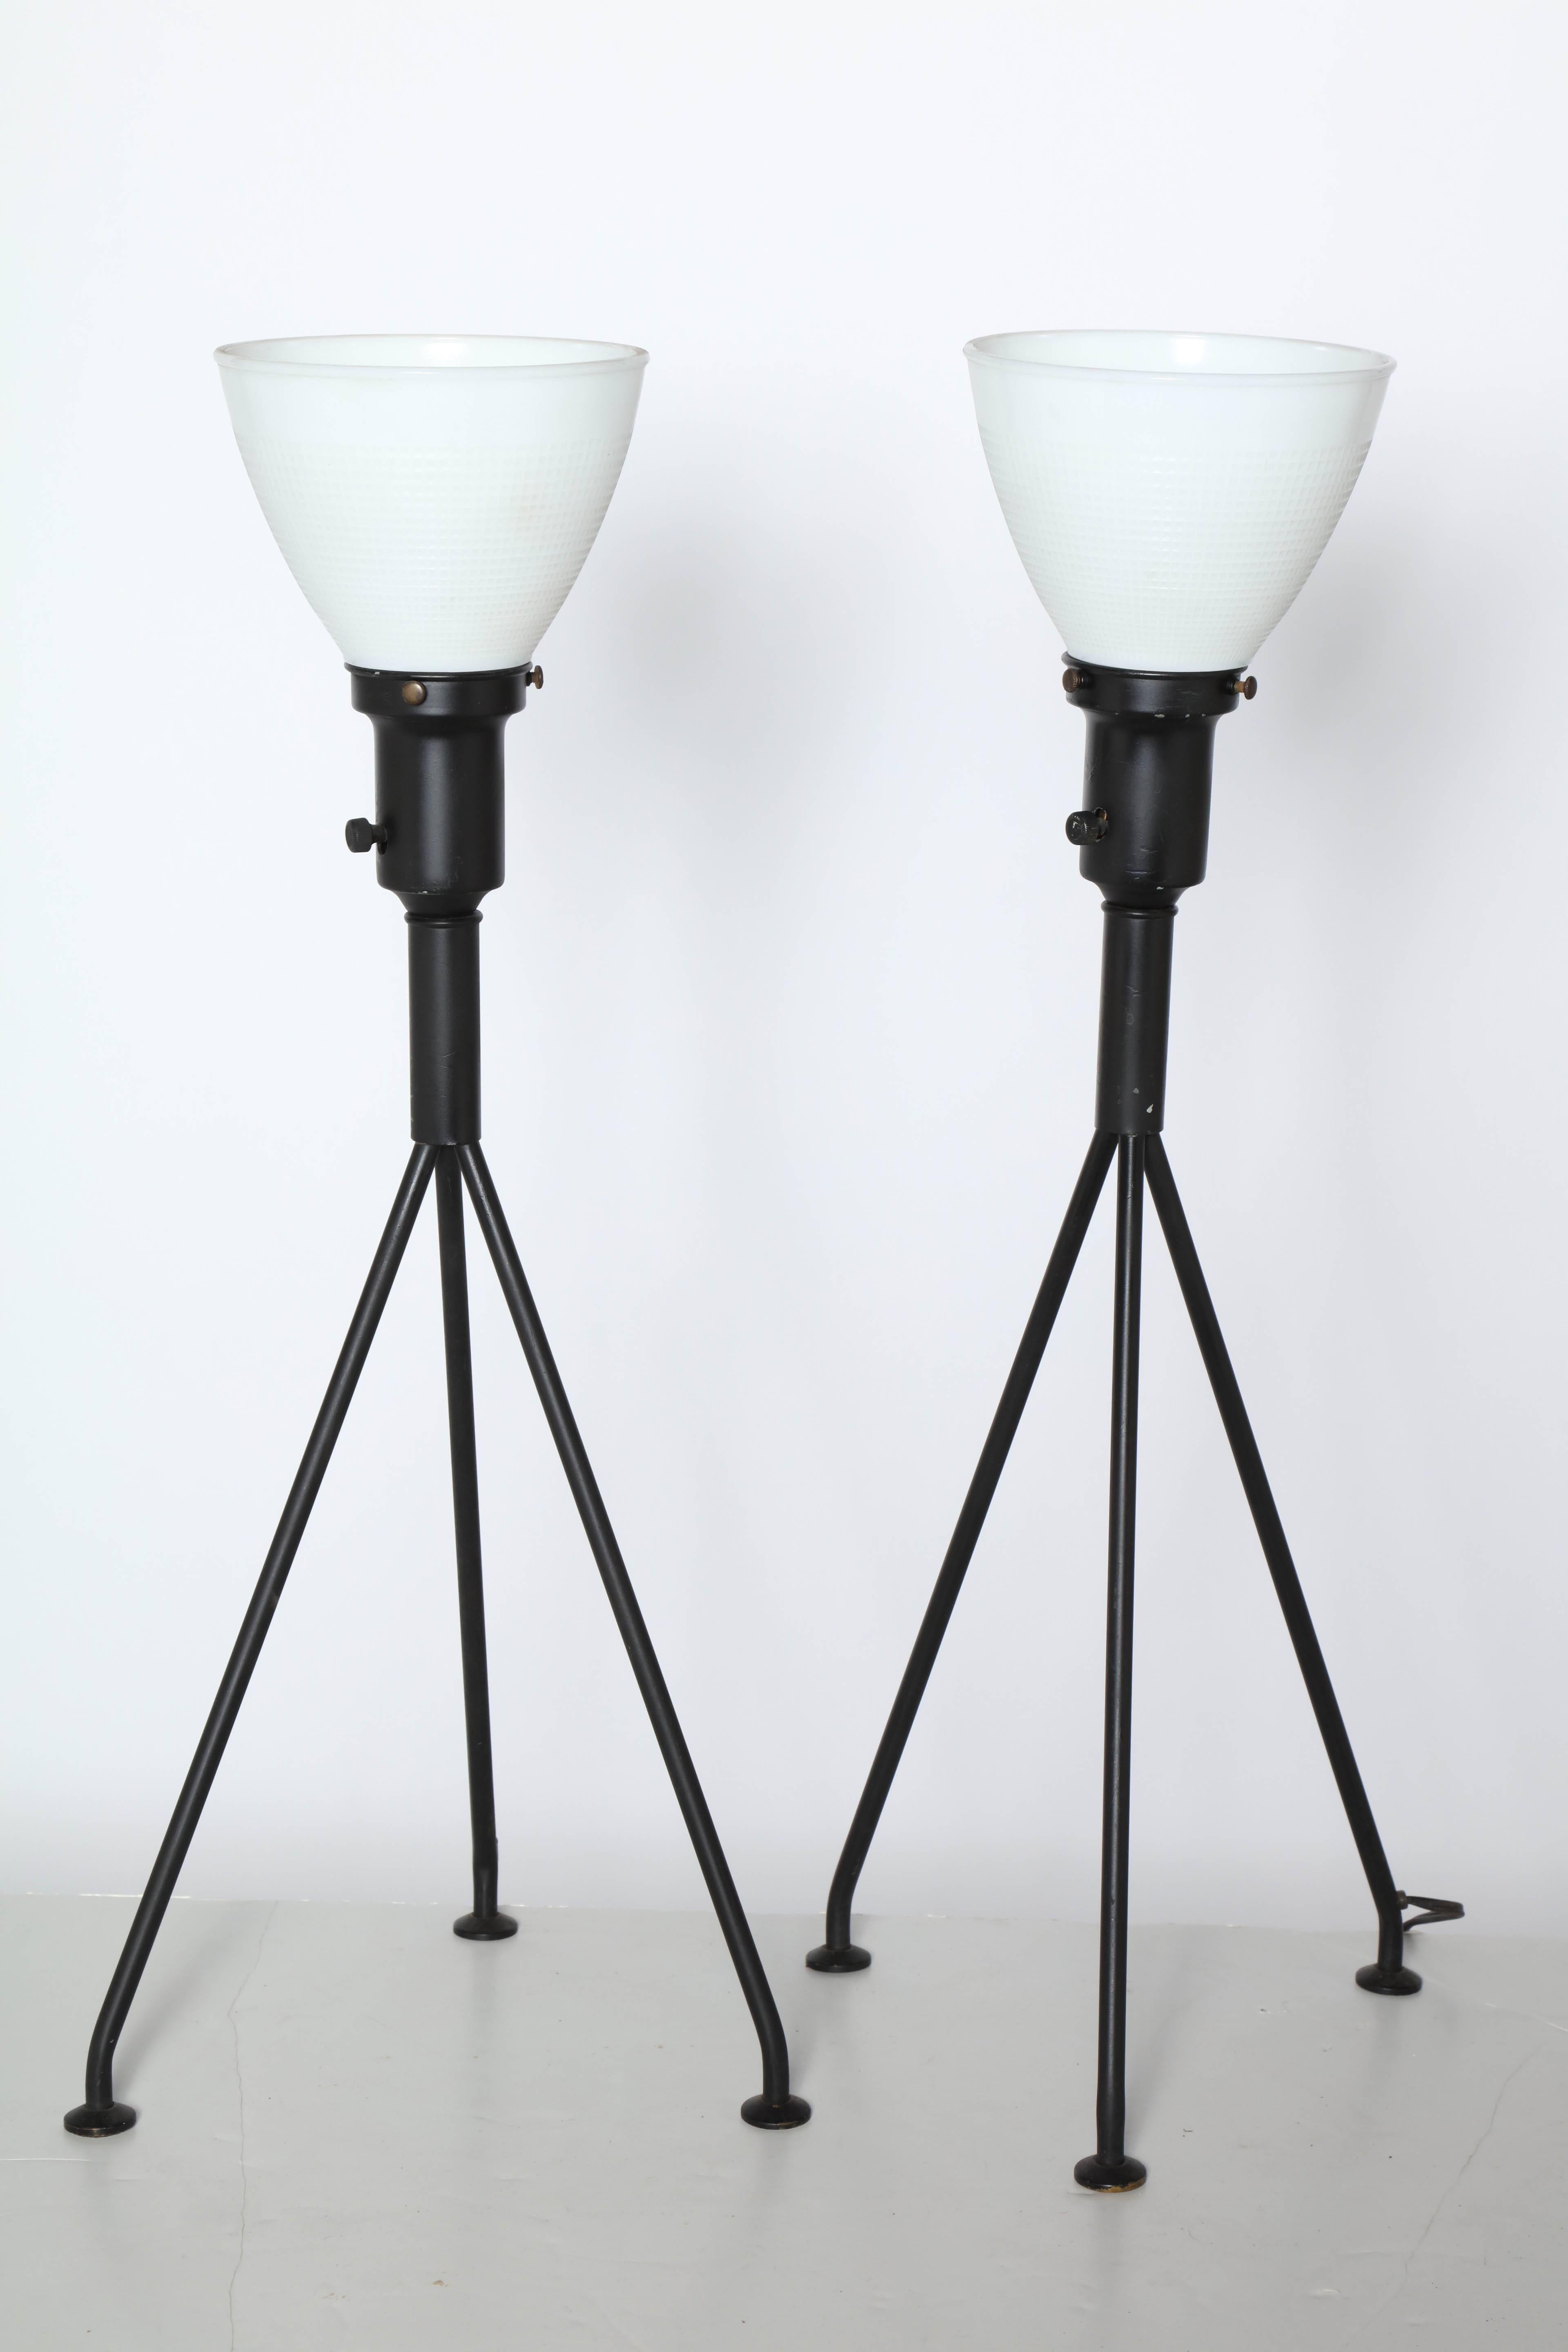 American Pair of Gerald Thurston Black Iron Tripod Table Lamps with White Glass Shades